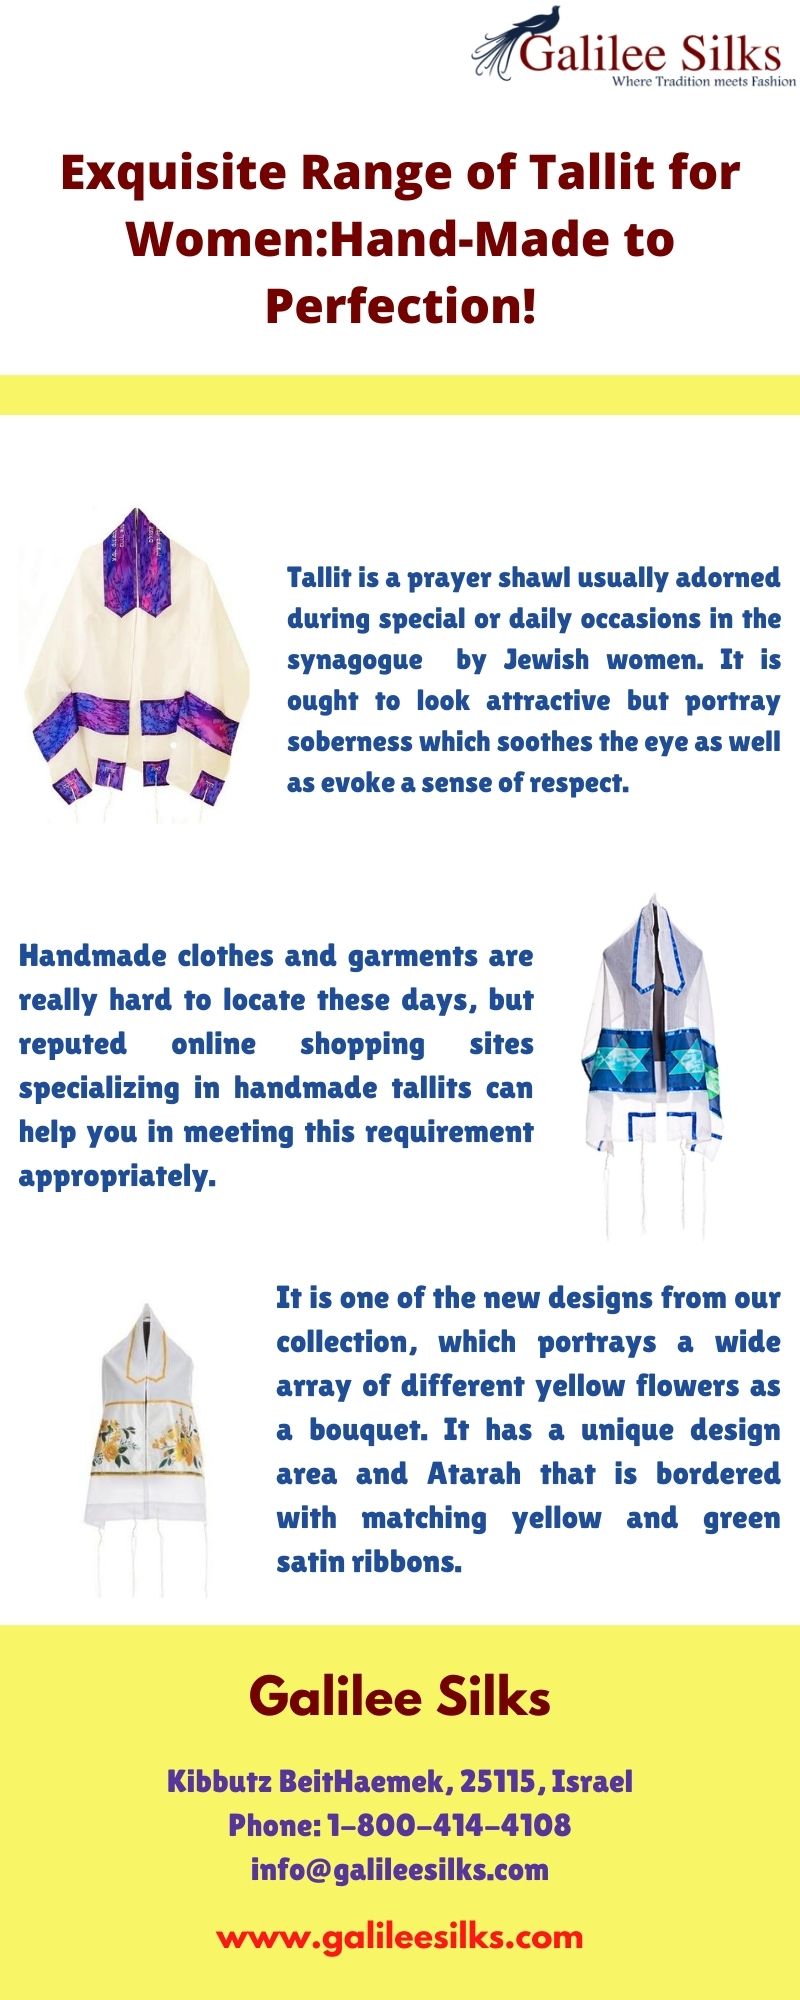 Exquisite Range of Tallit for Women: Hand-Made to Perfection! The Tallit is a significant part in the lives of Reform and Conservative Jewish women. Tallits are not just prayer shawls; it have now become a trendy fashion garment. For more details, visit this link: https://bit.ly/3gNXyZx
 by amramrafi